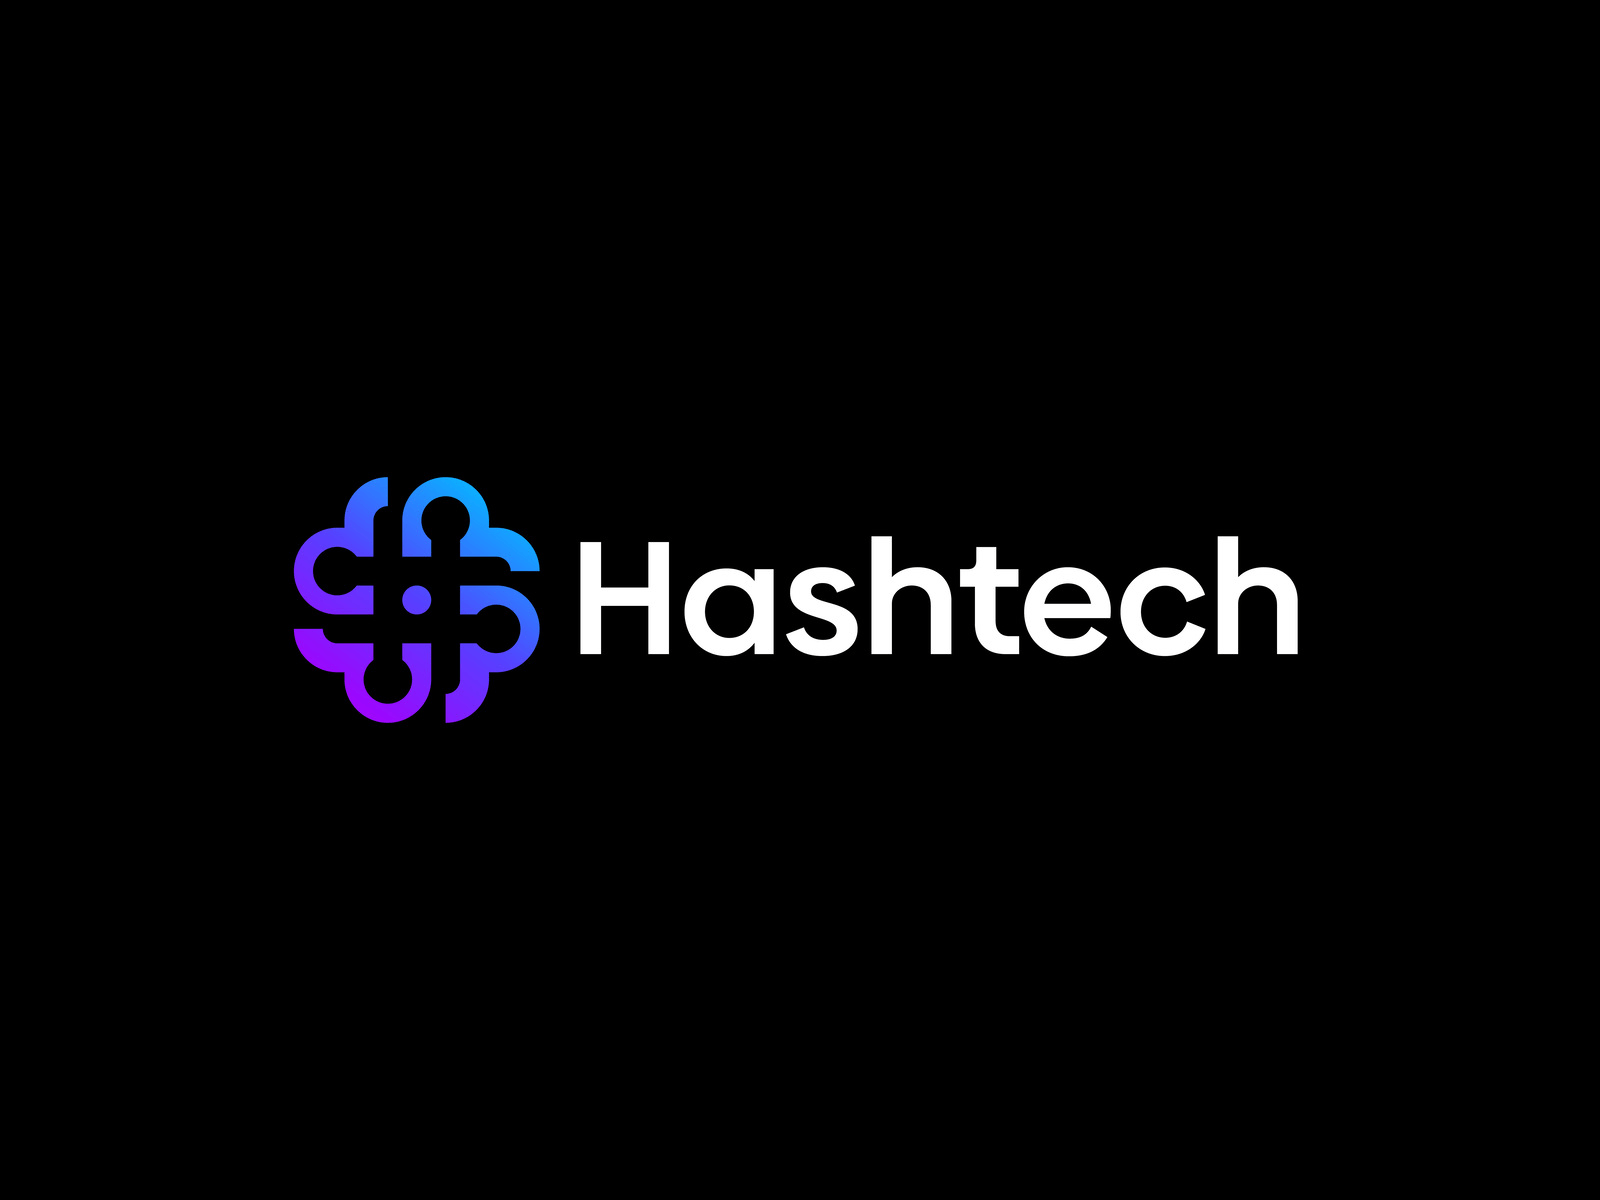 Hashtech Logo Brand Guidelines by Sumon Yousuf on Dribbble